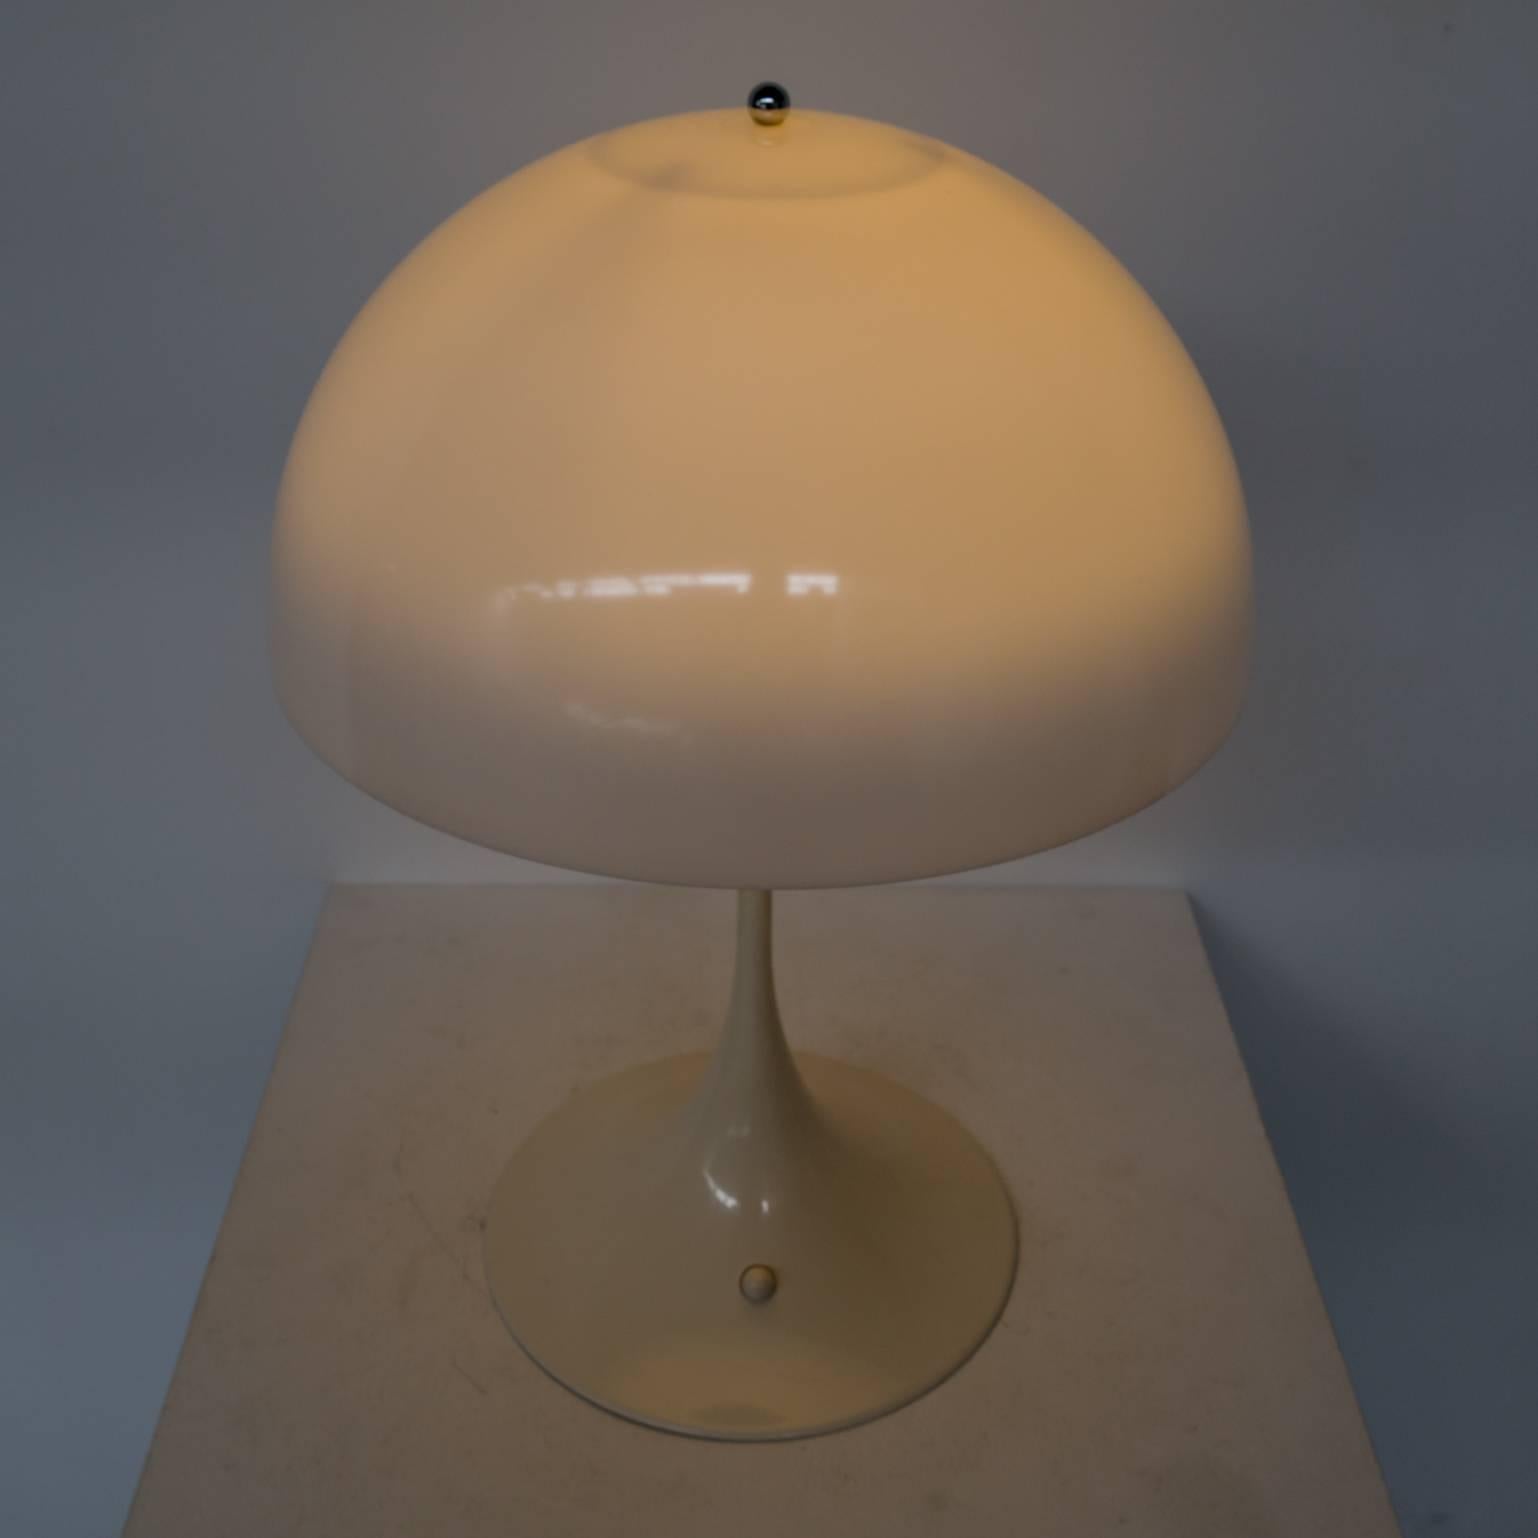 1960s, Verner Panton panthella table lamp by Louis Poulsen. Iconic design lamp, very good condition.